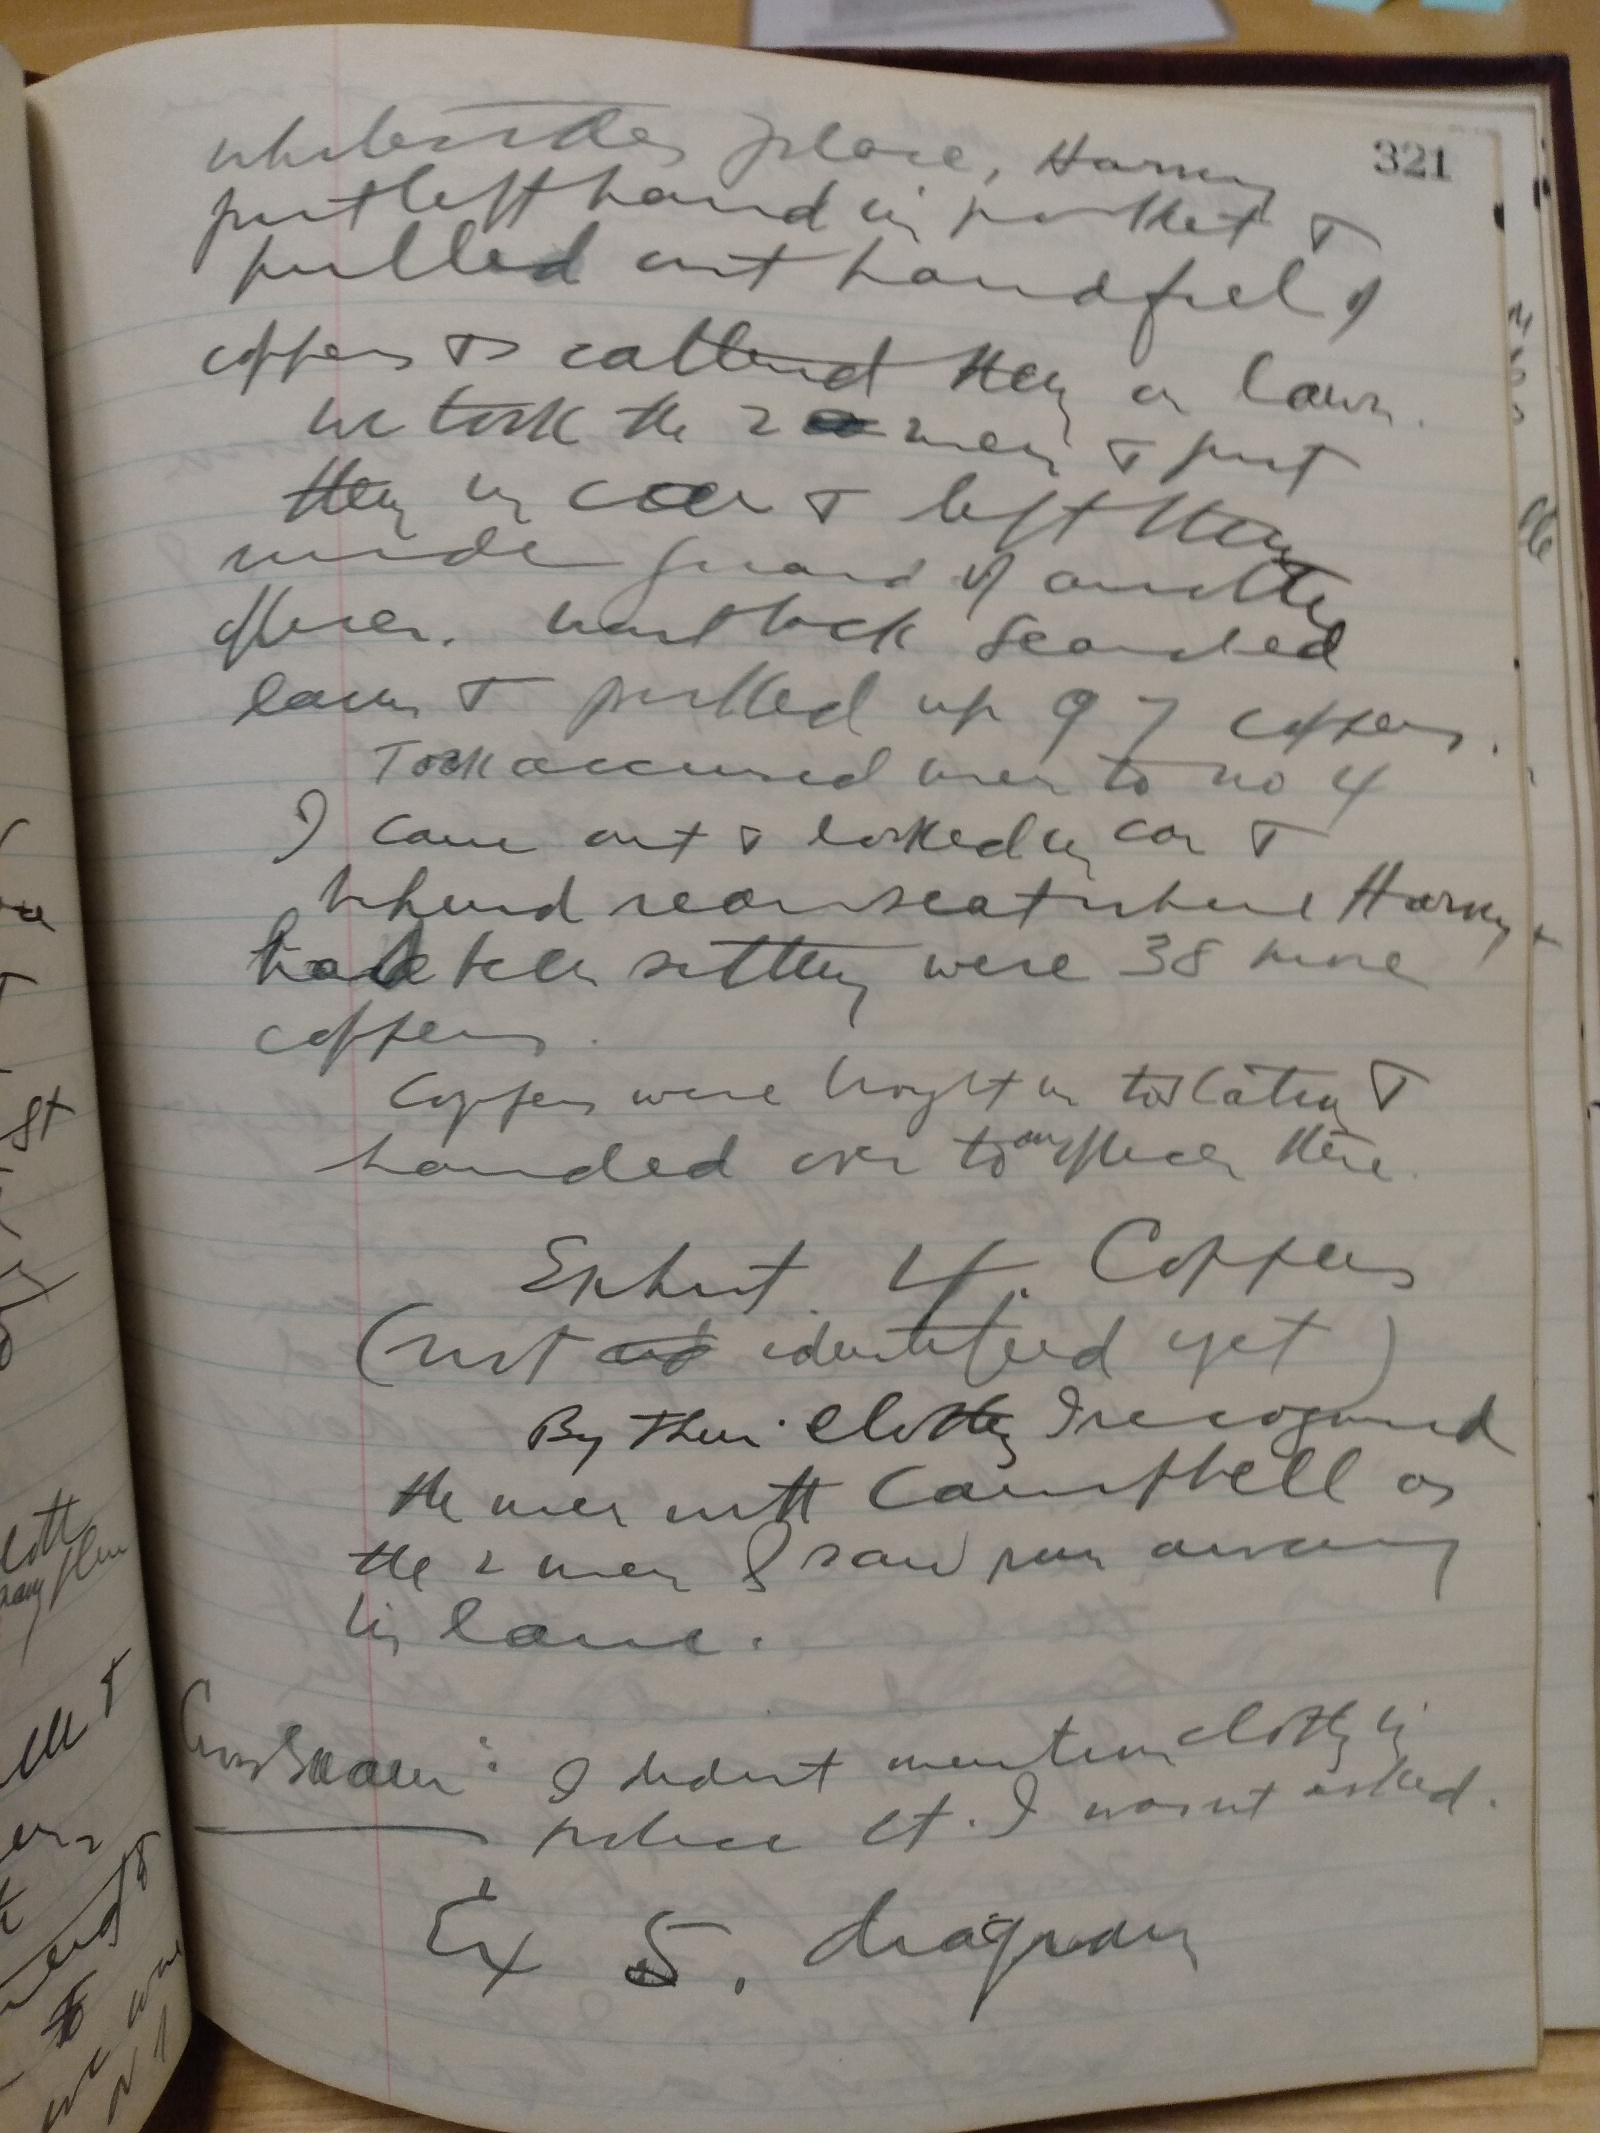 Page 5 of Judge Denton's bench book notes